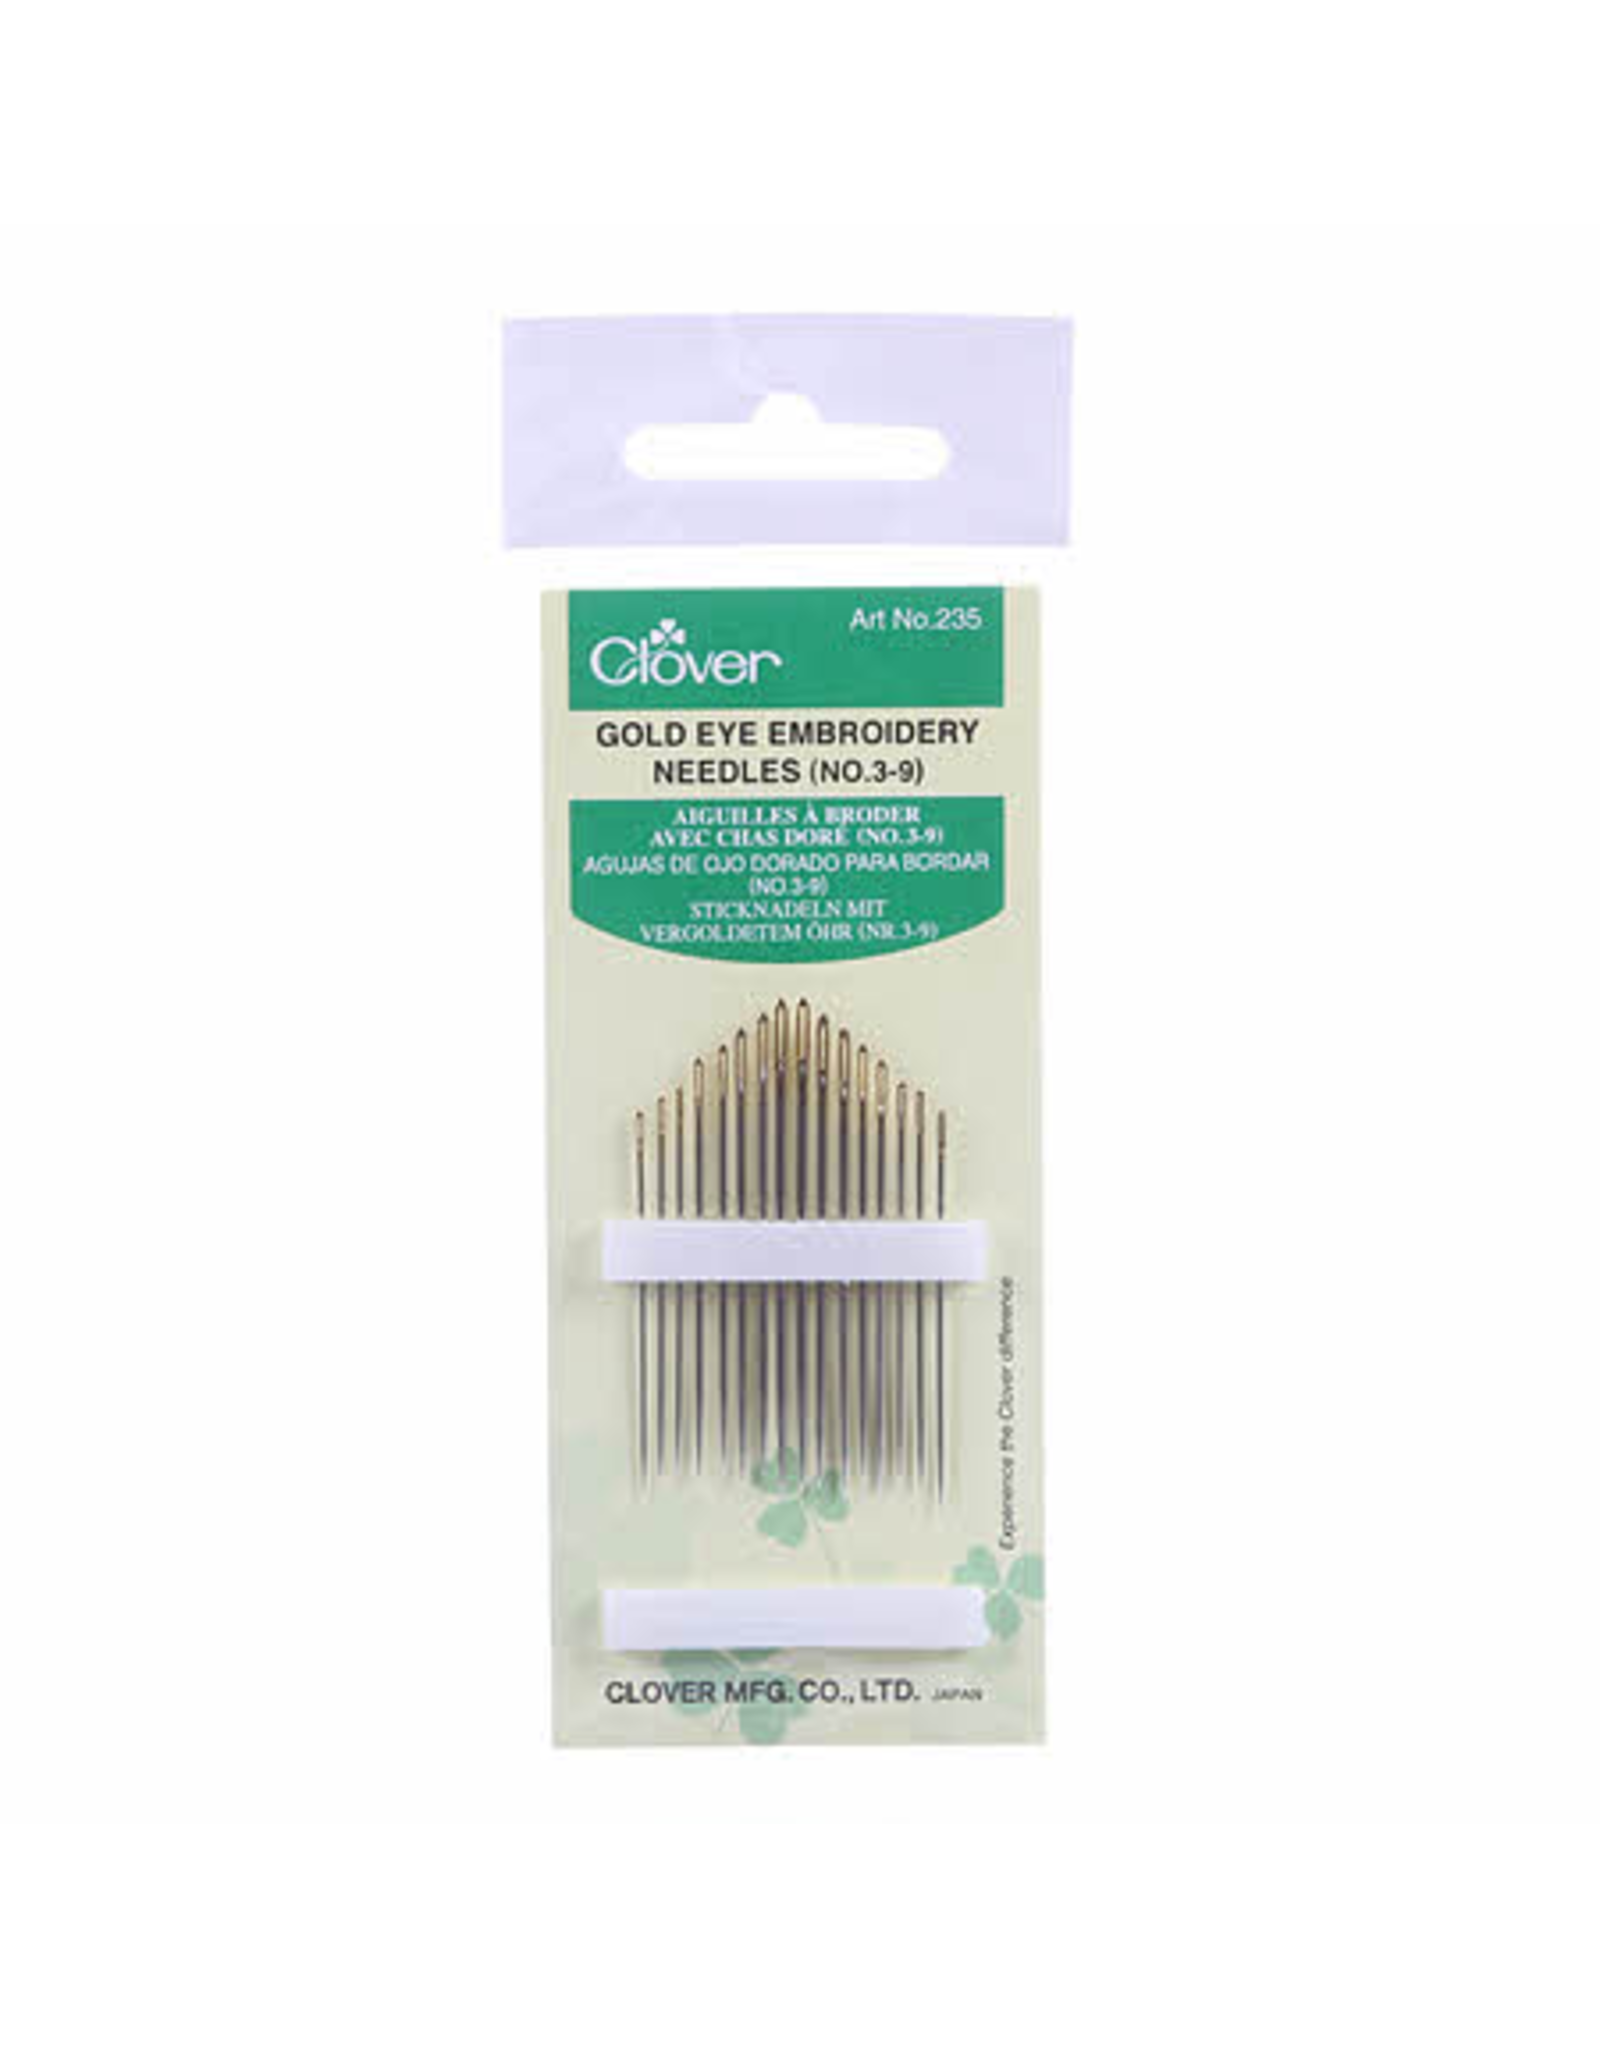 Clover Gold Eye Embroidery Needles - Set of 16, Sizes  No. 3-9